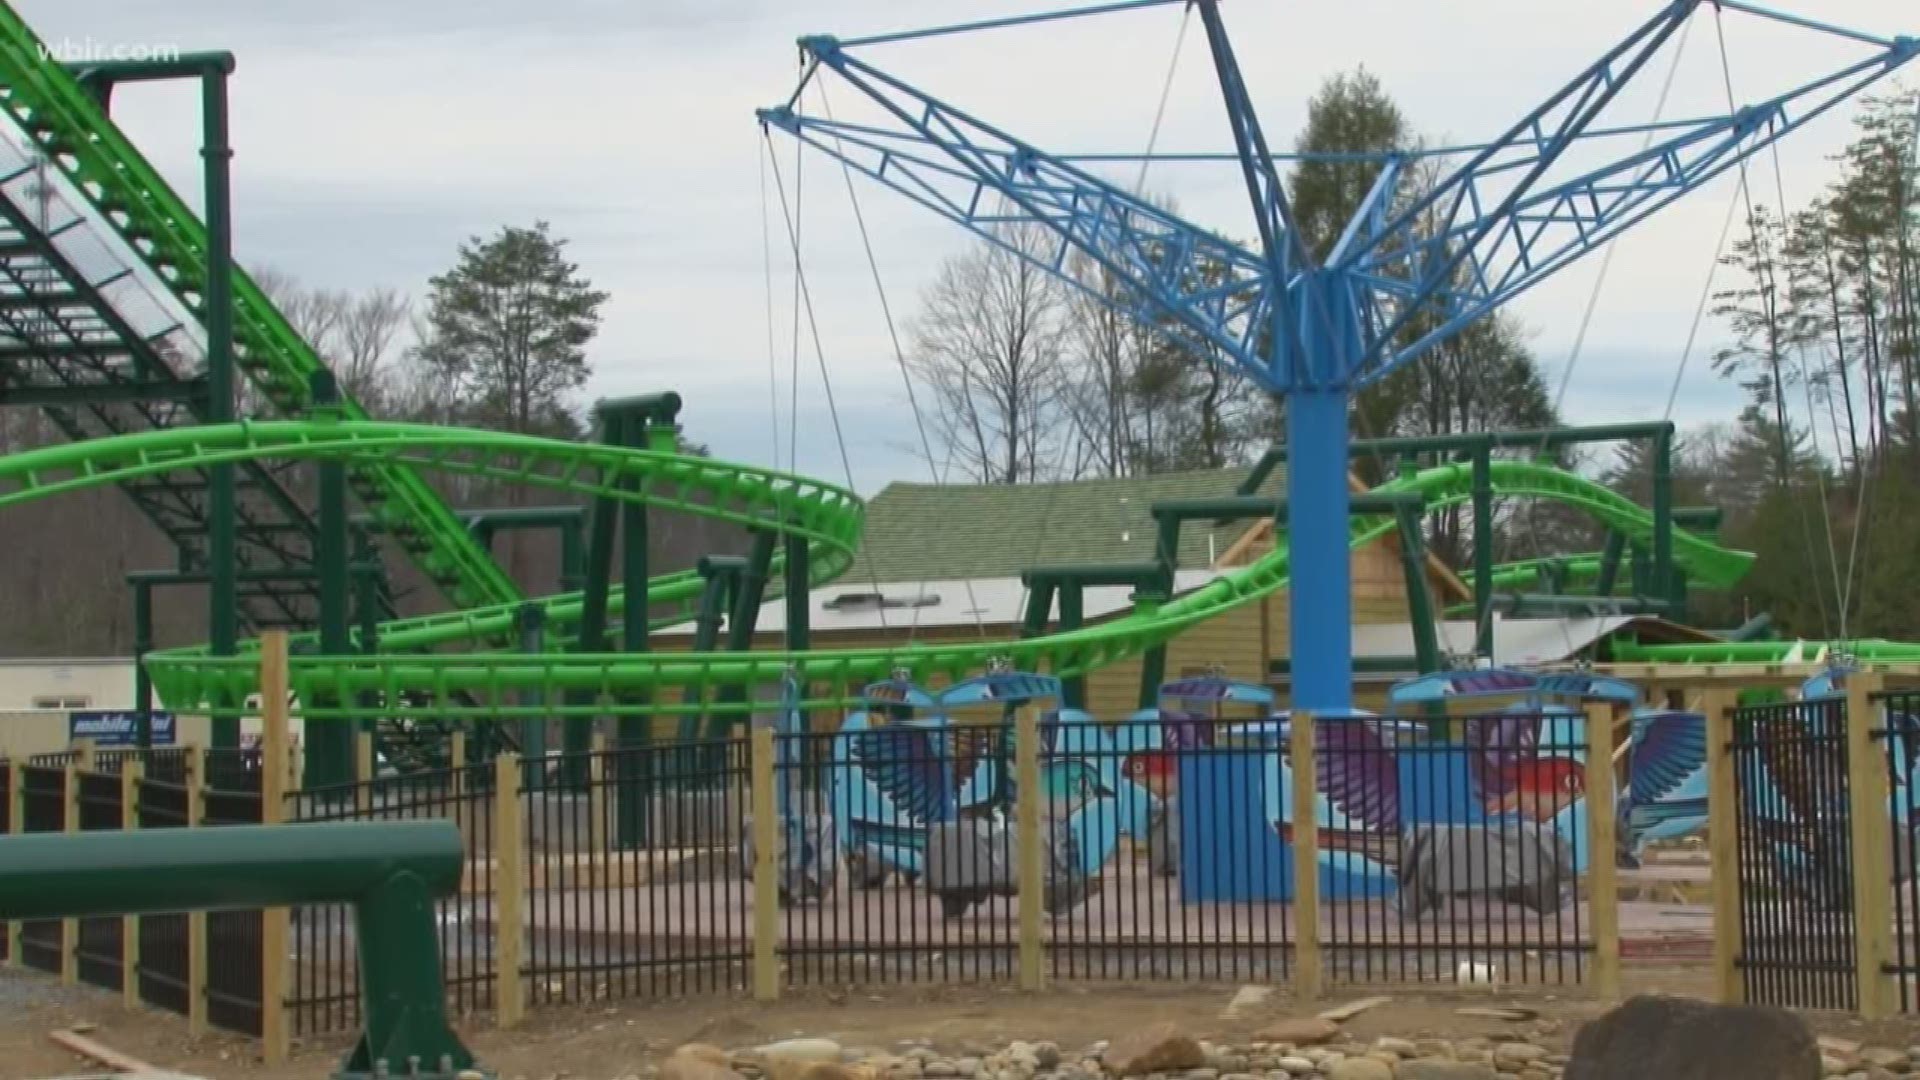 Dollywood is in the middle of expansion and building another adventure at the park. 10News reporter Sean Franklin got a tour of the construction site.